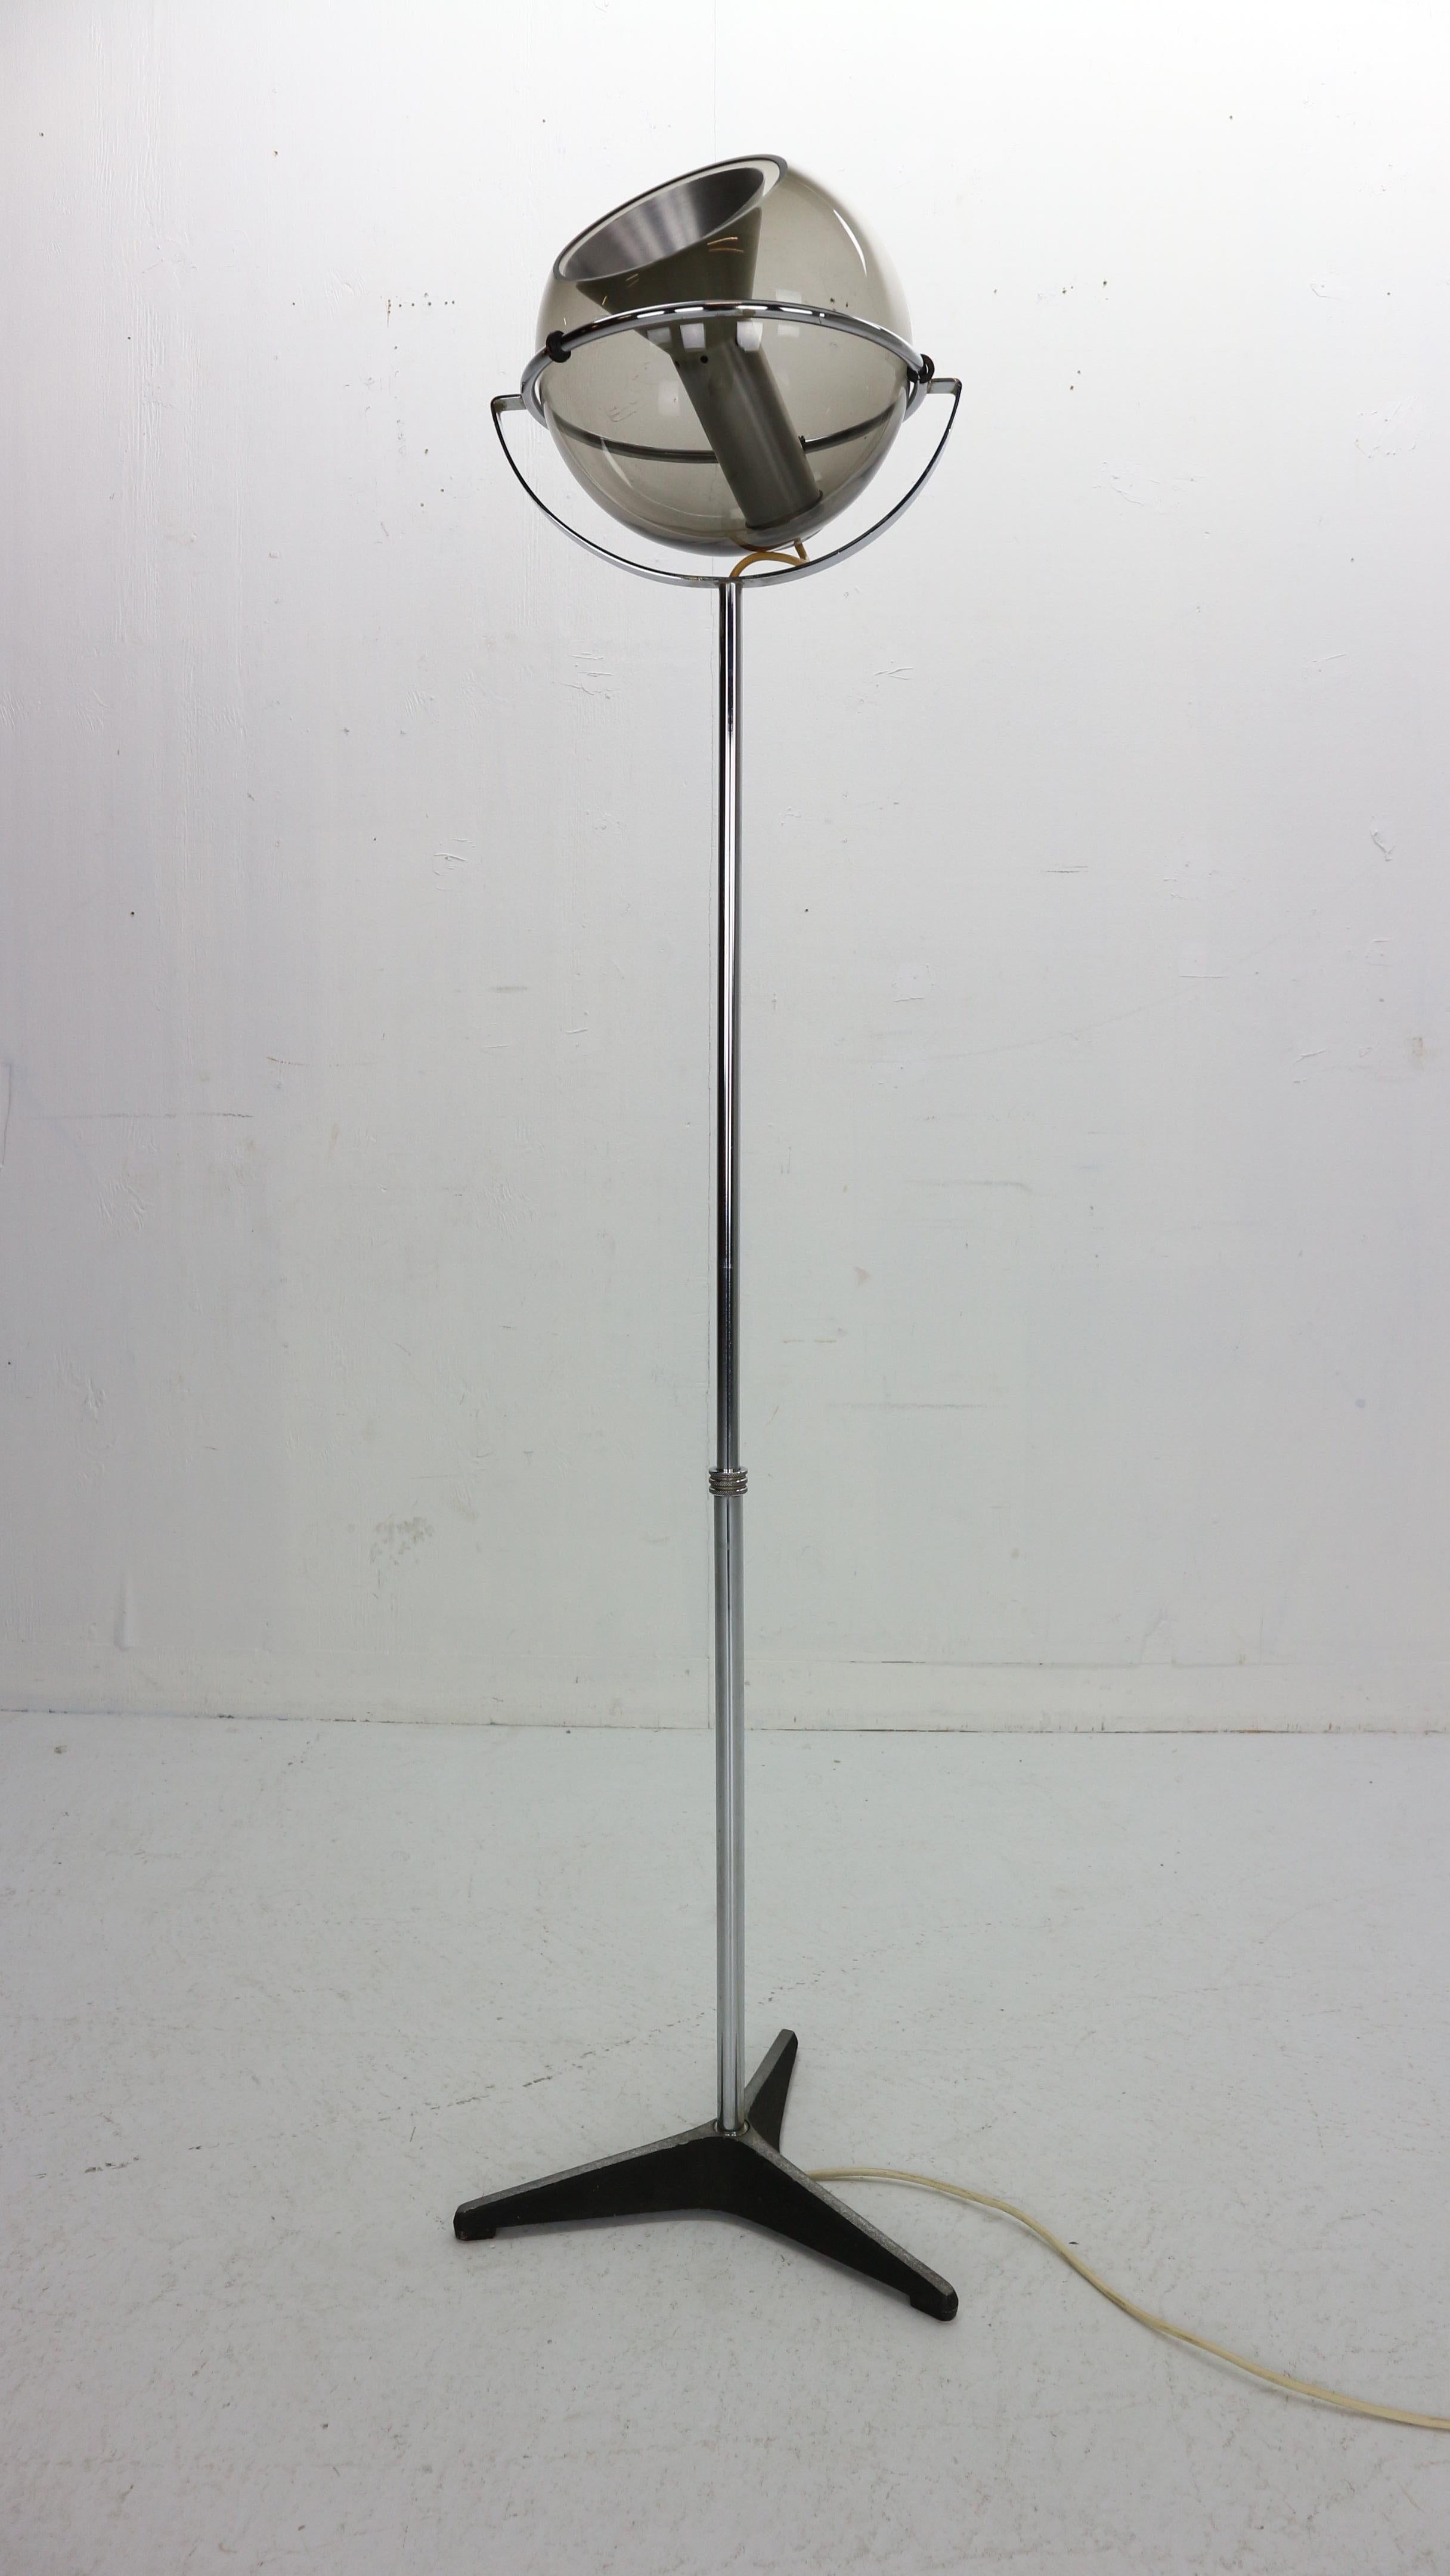 Globe floor lamp by Frank Ligtelijn for RAAK, designed in 1960s, Netherlands. Smoked glass globe on an adjustable chrome stand. Original 3 star iron base and foot switch with original wiring.
Floating smoked glass globe rotates in almost any